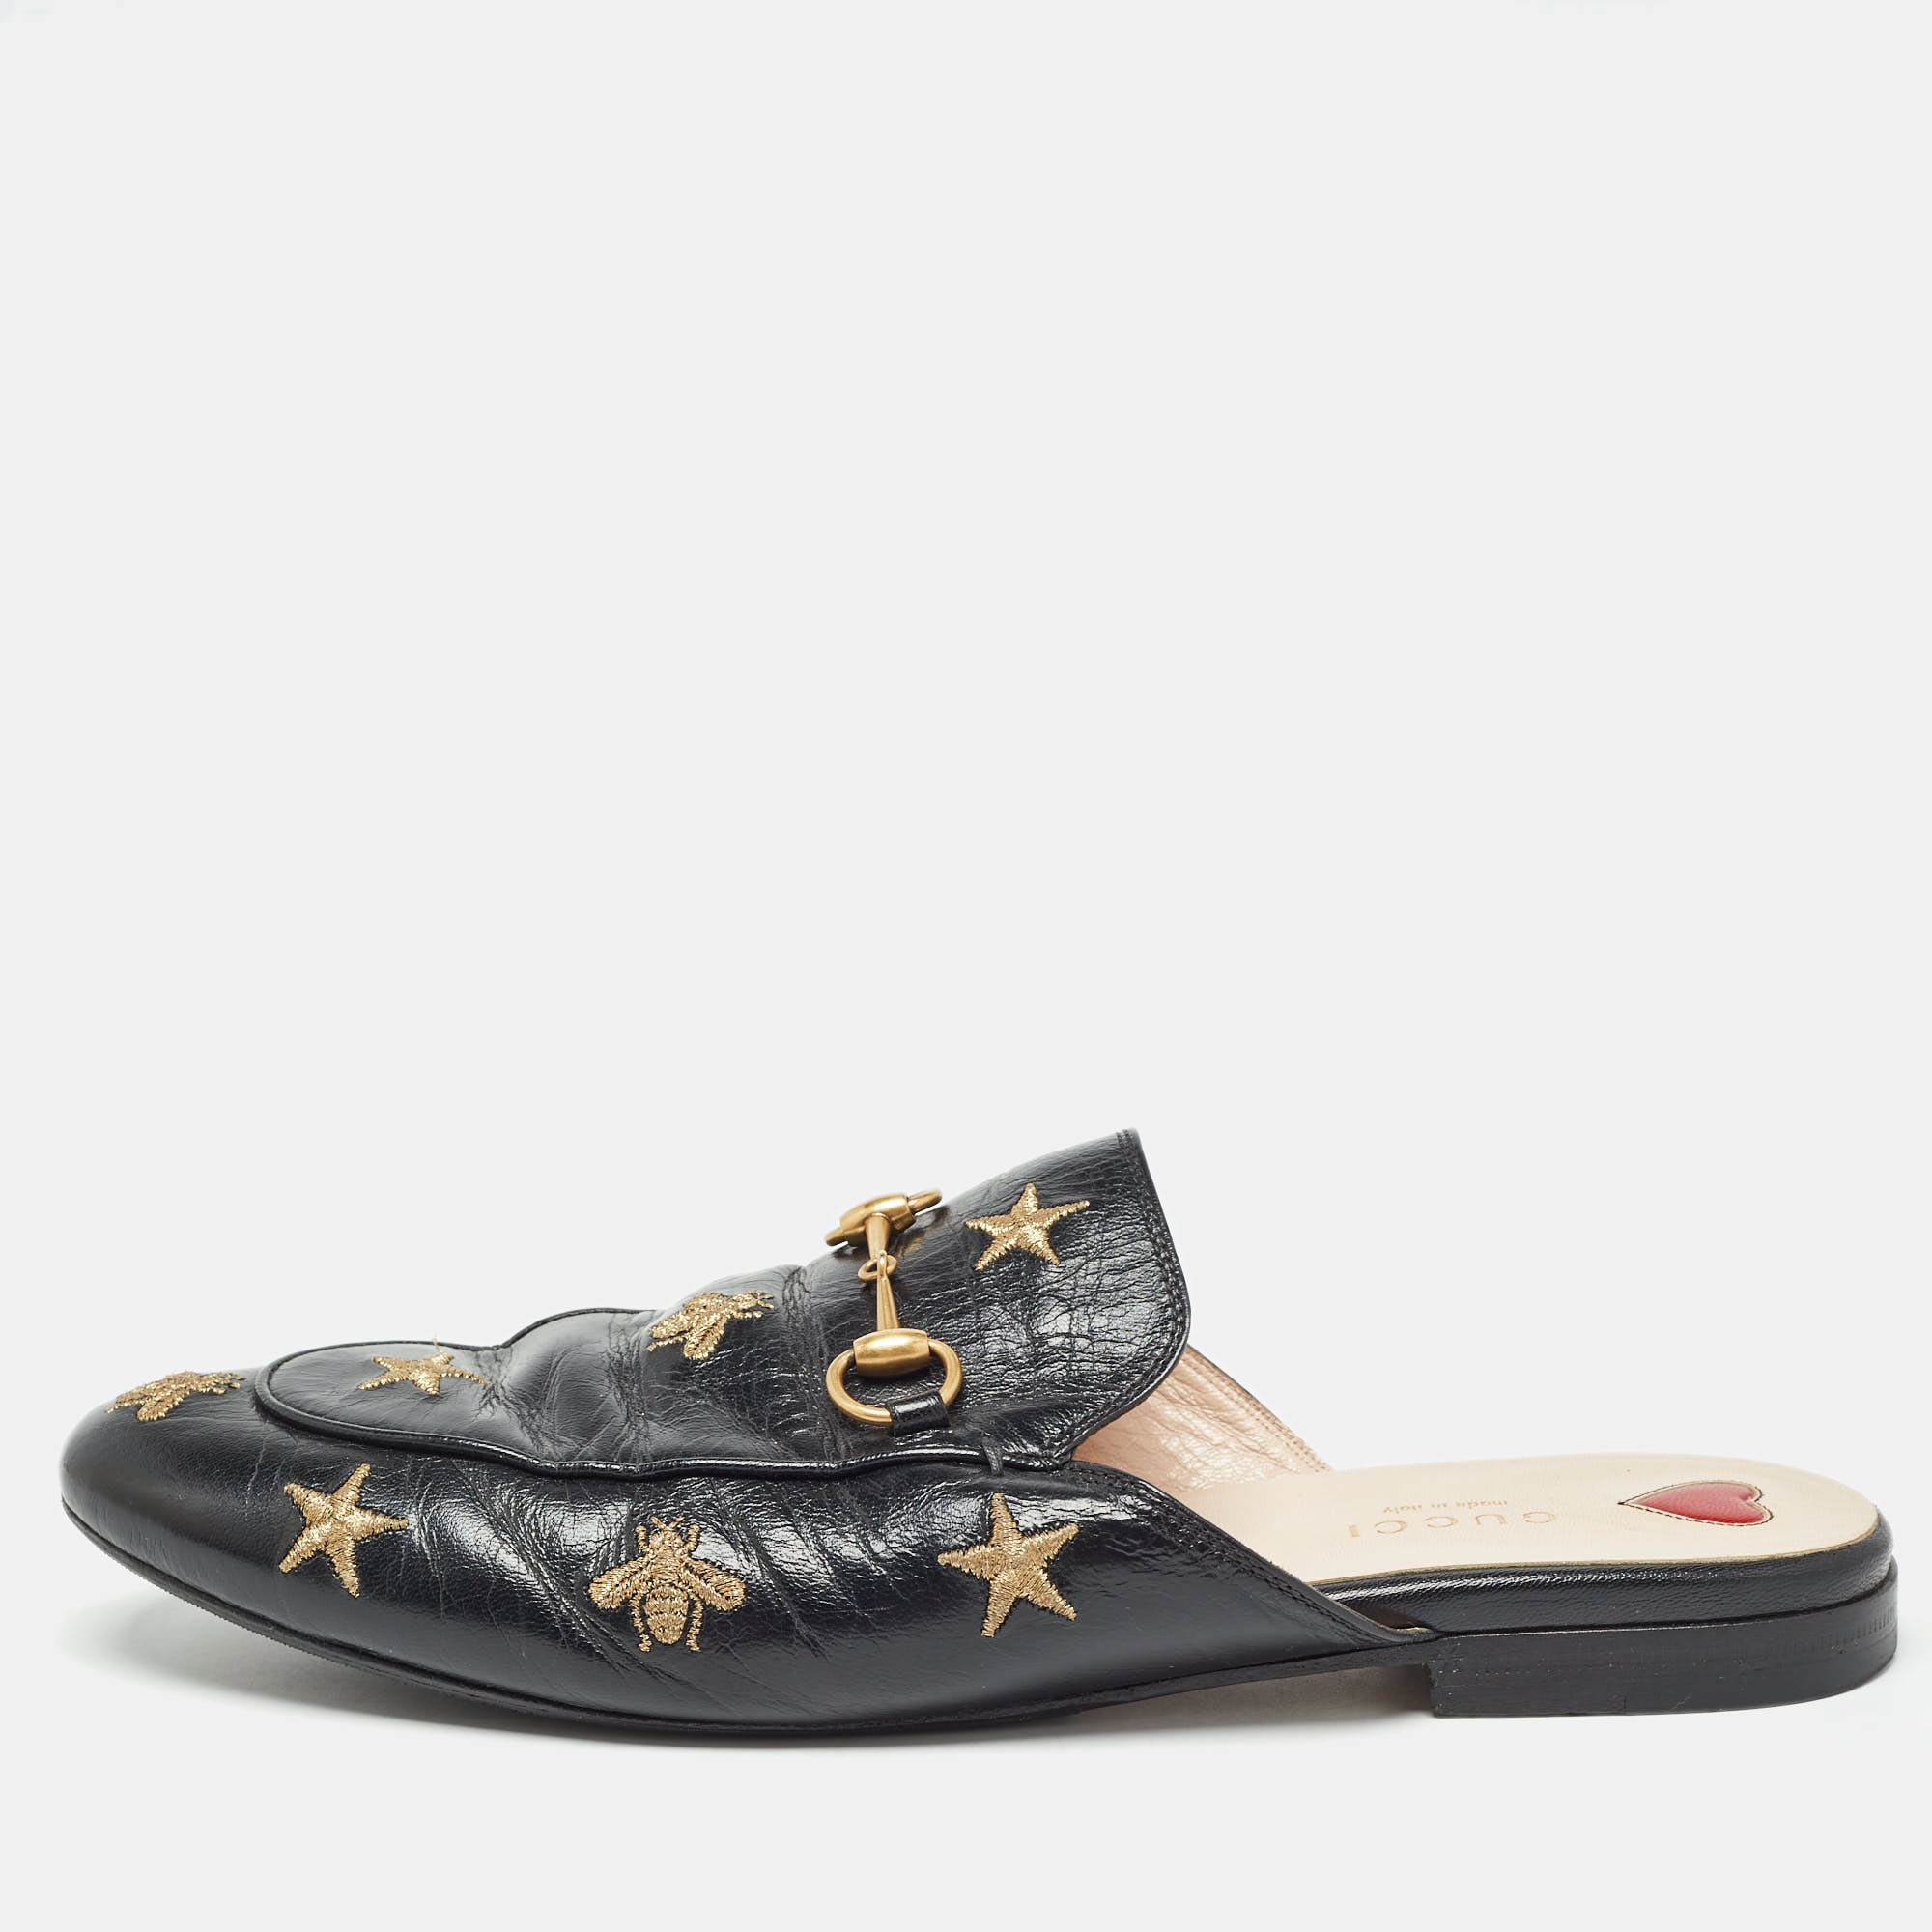 Let this comfortable pair be your first choice when youre out for a long day. These Gucci mules have well sewn uppers beautifully set on durable soles.